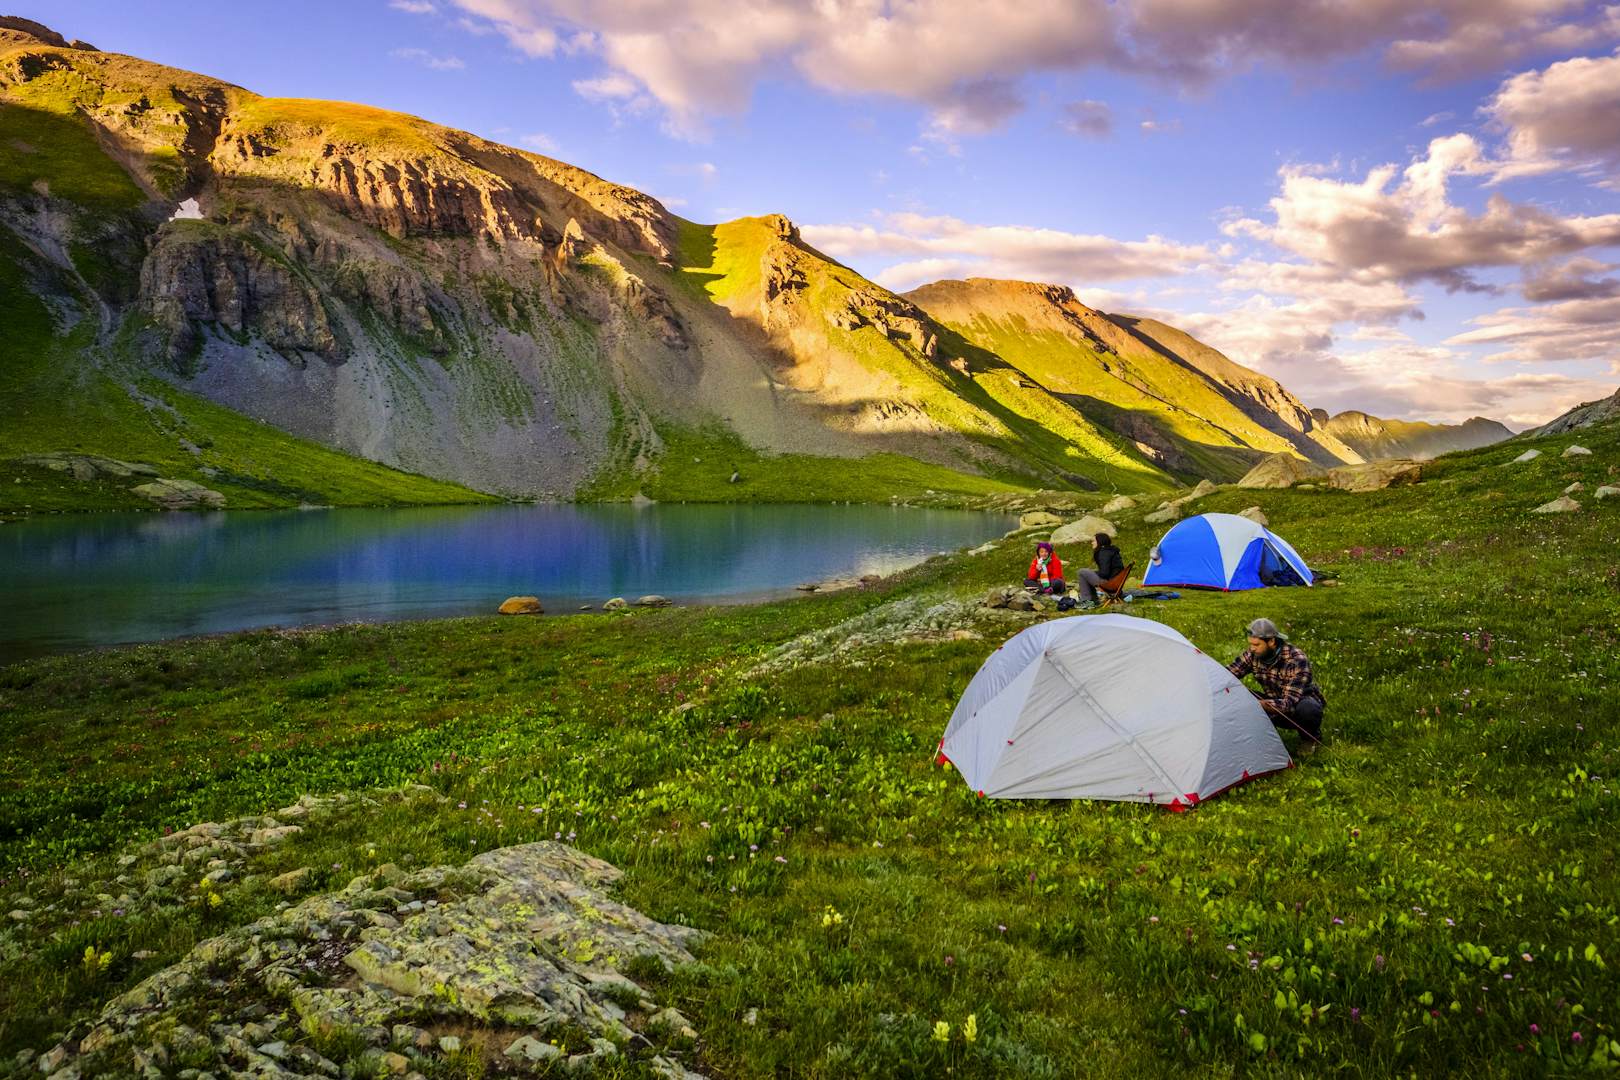 The most scenic US campgrounds to visit in 2022